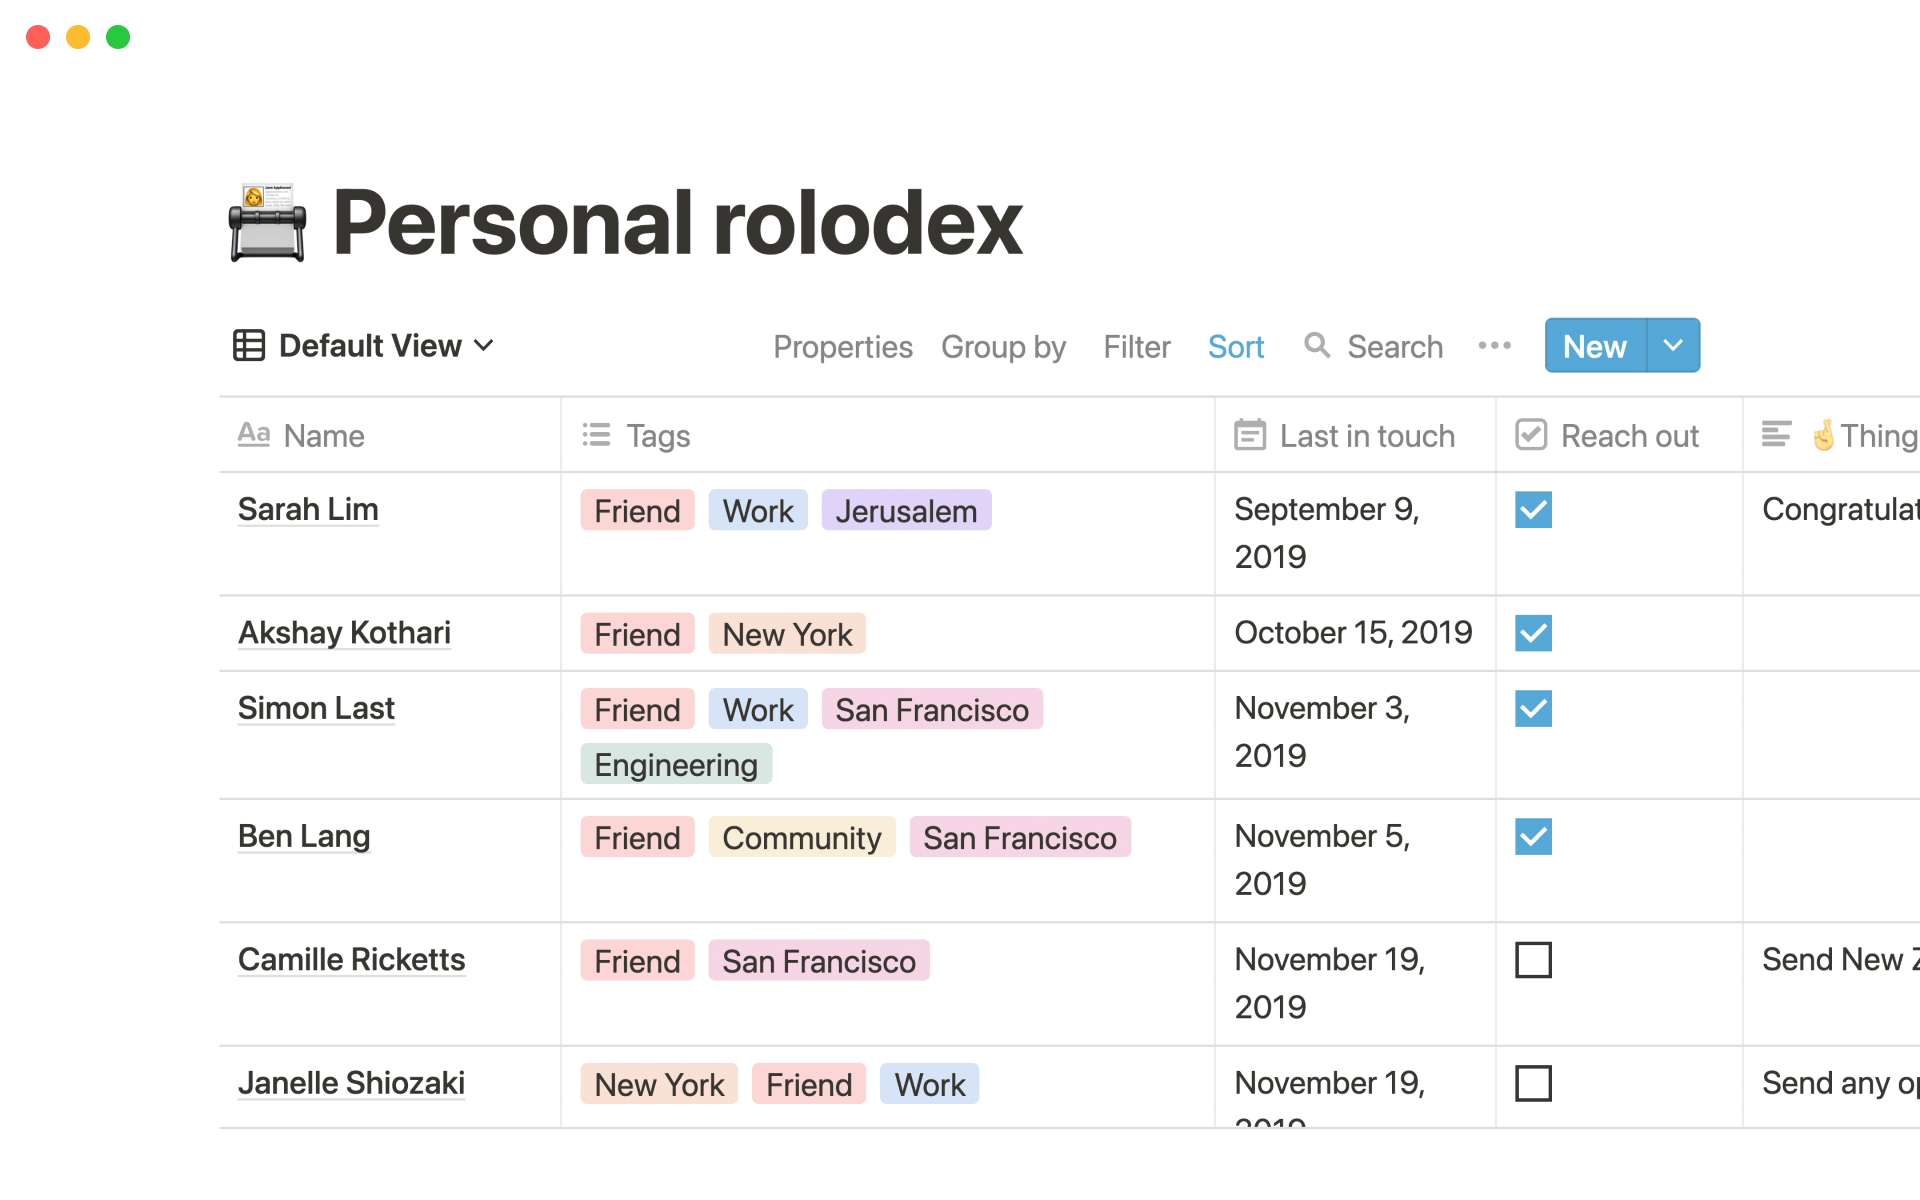 The desktop image for the Personal rolodex template